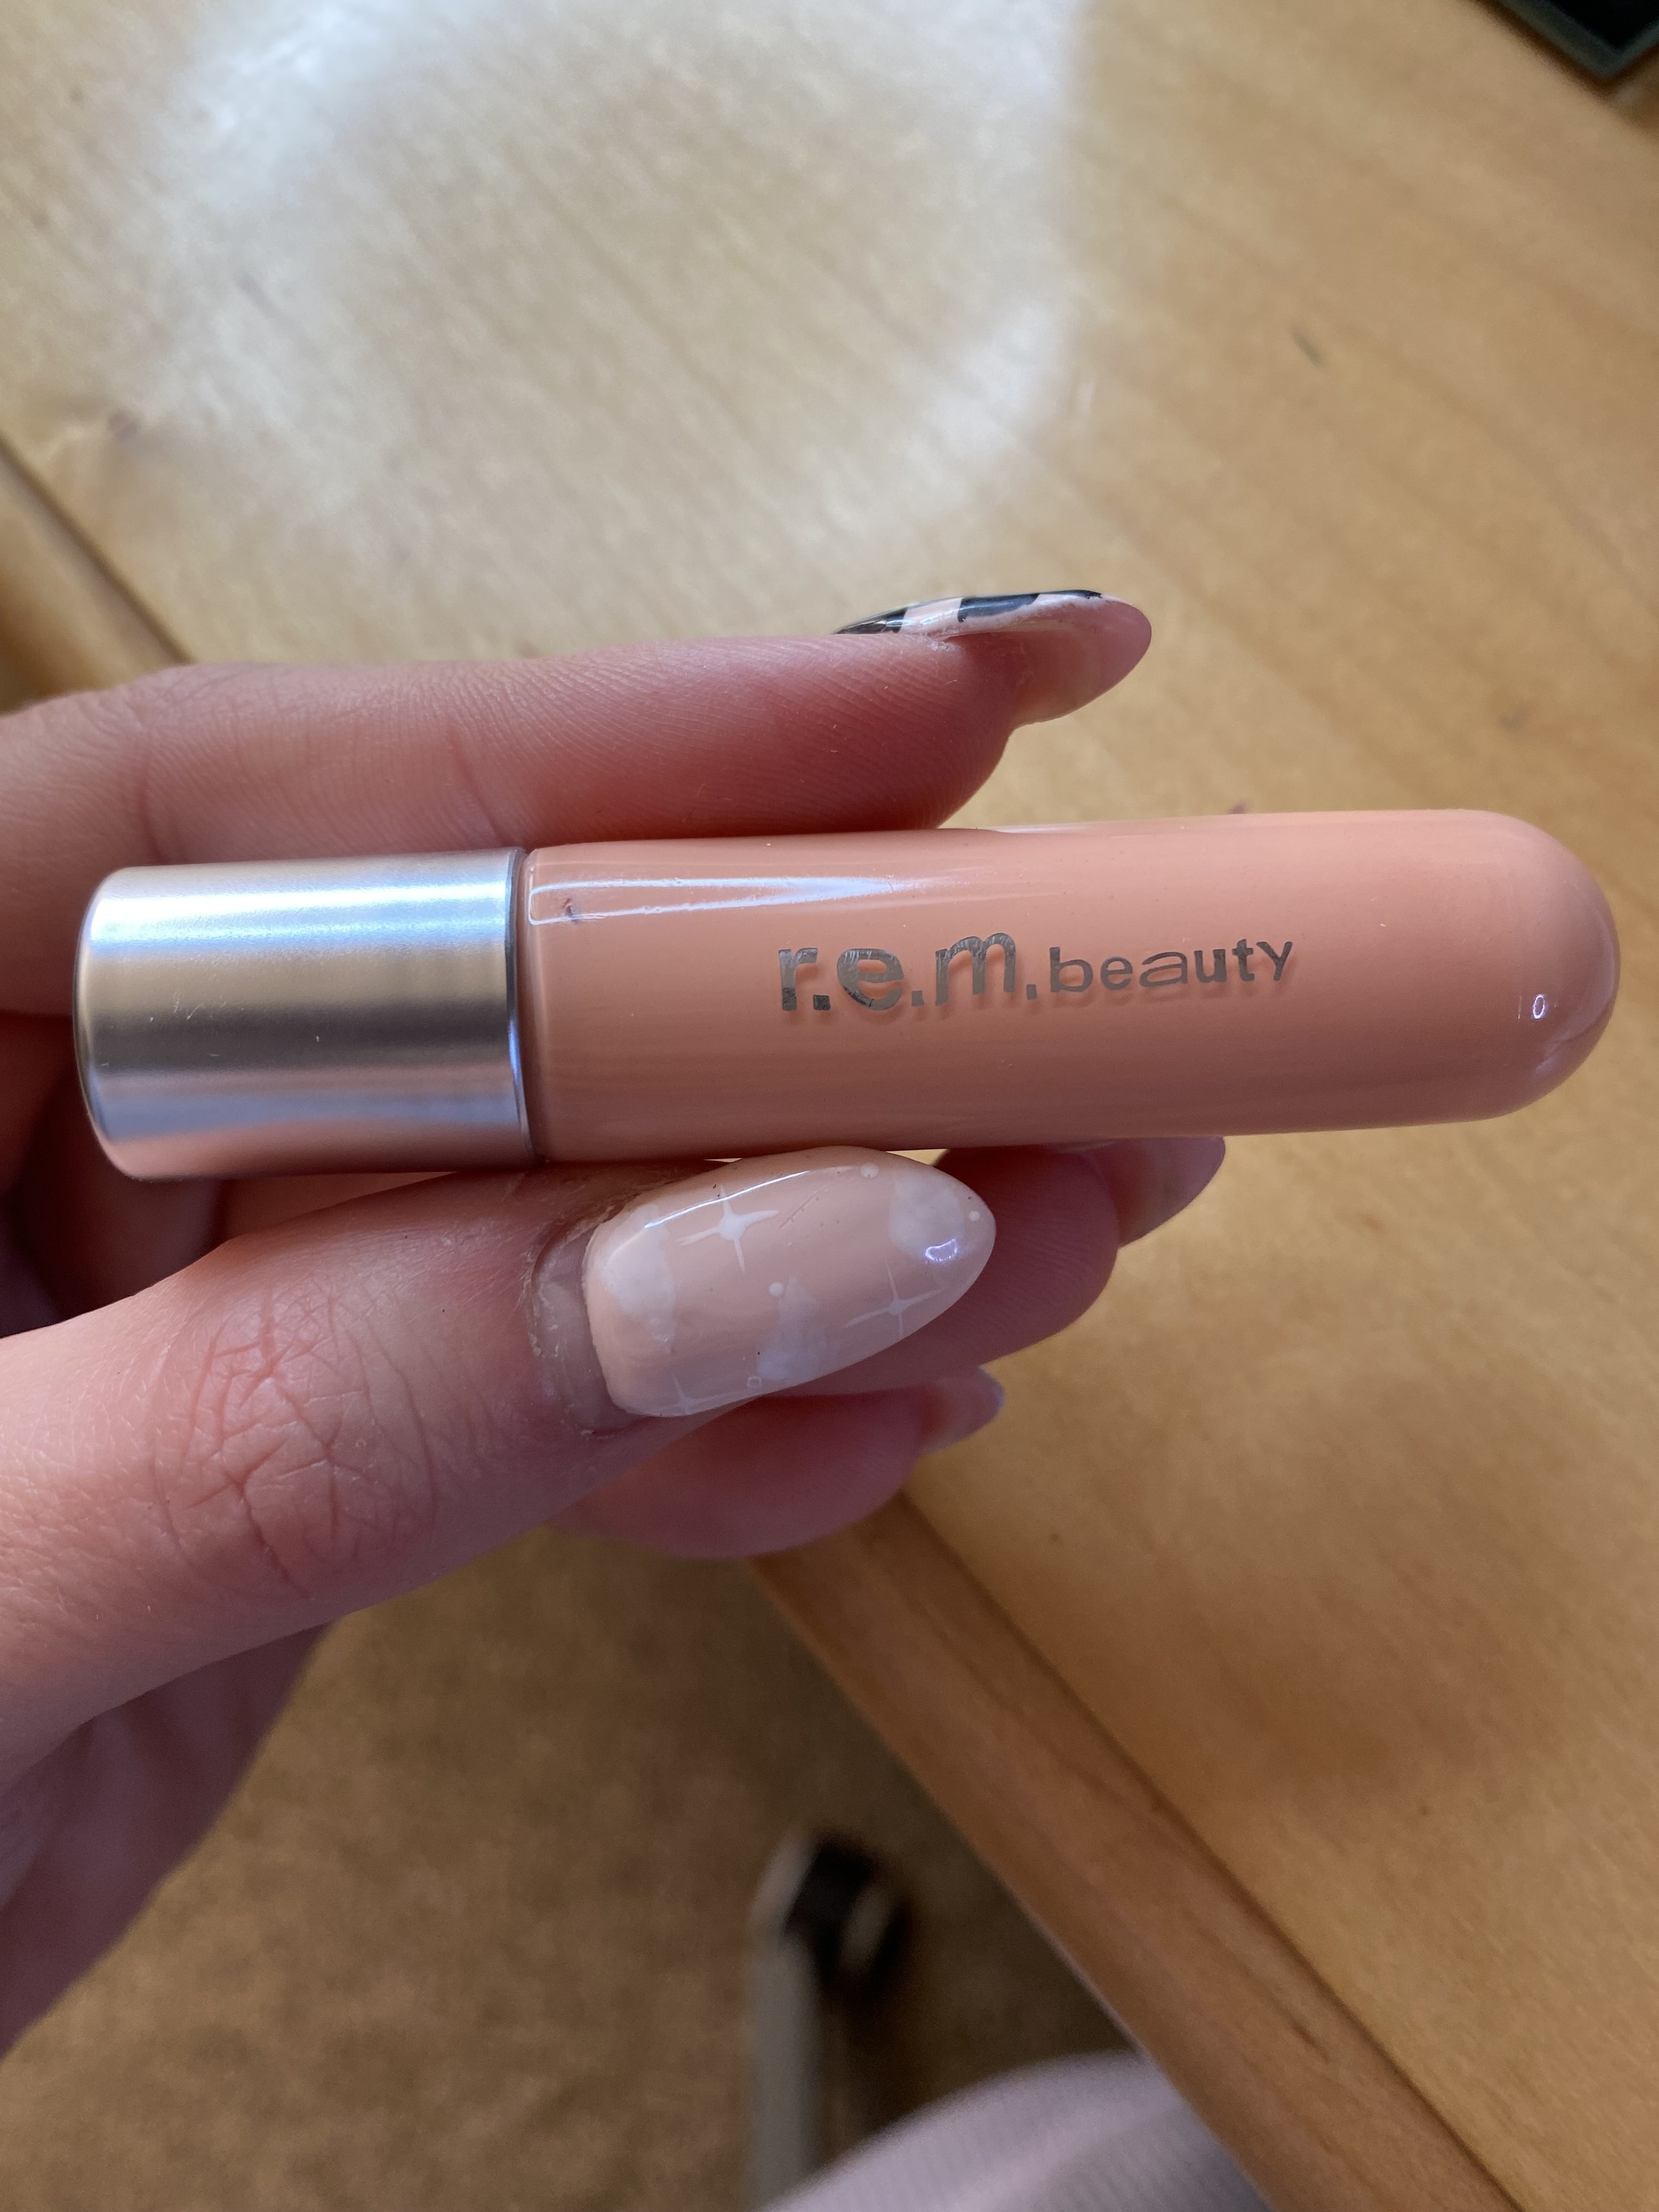 A shot of the pink, nude lip gloss